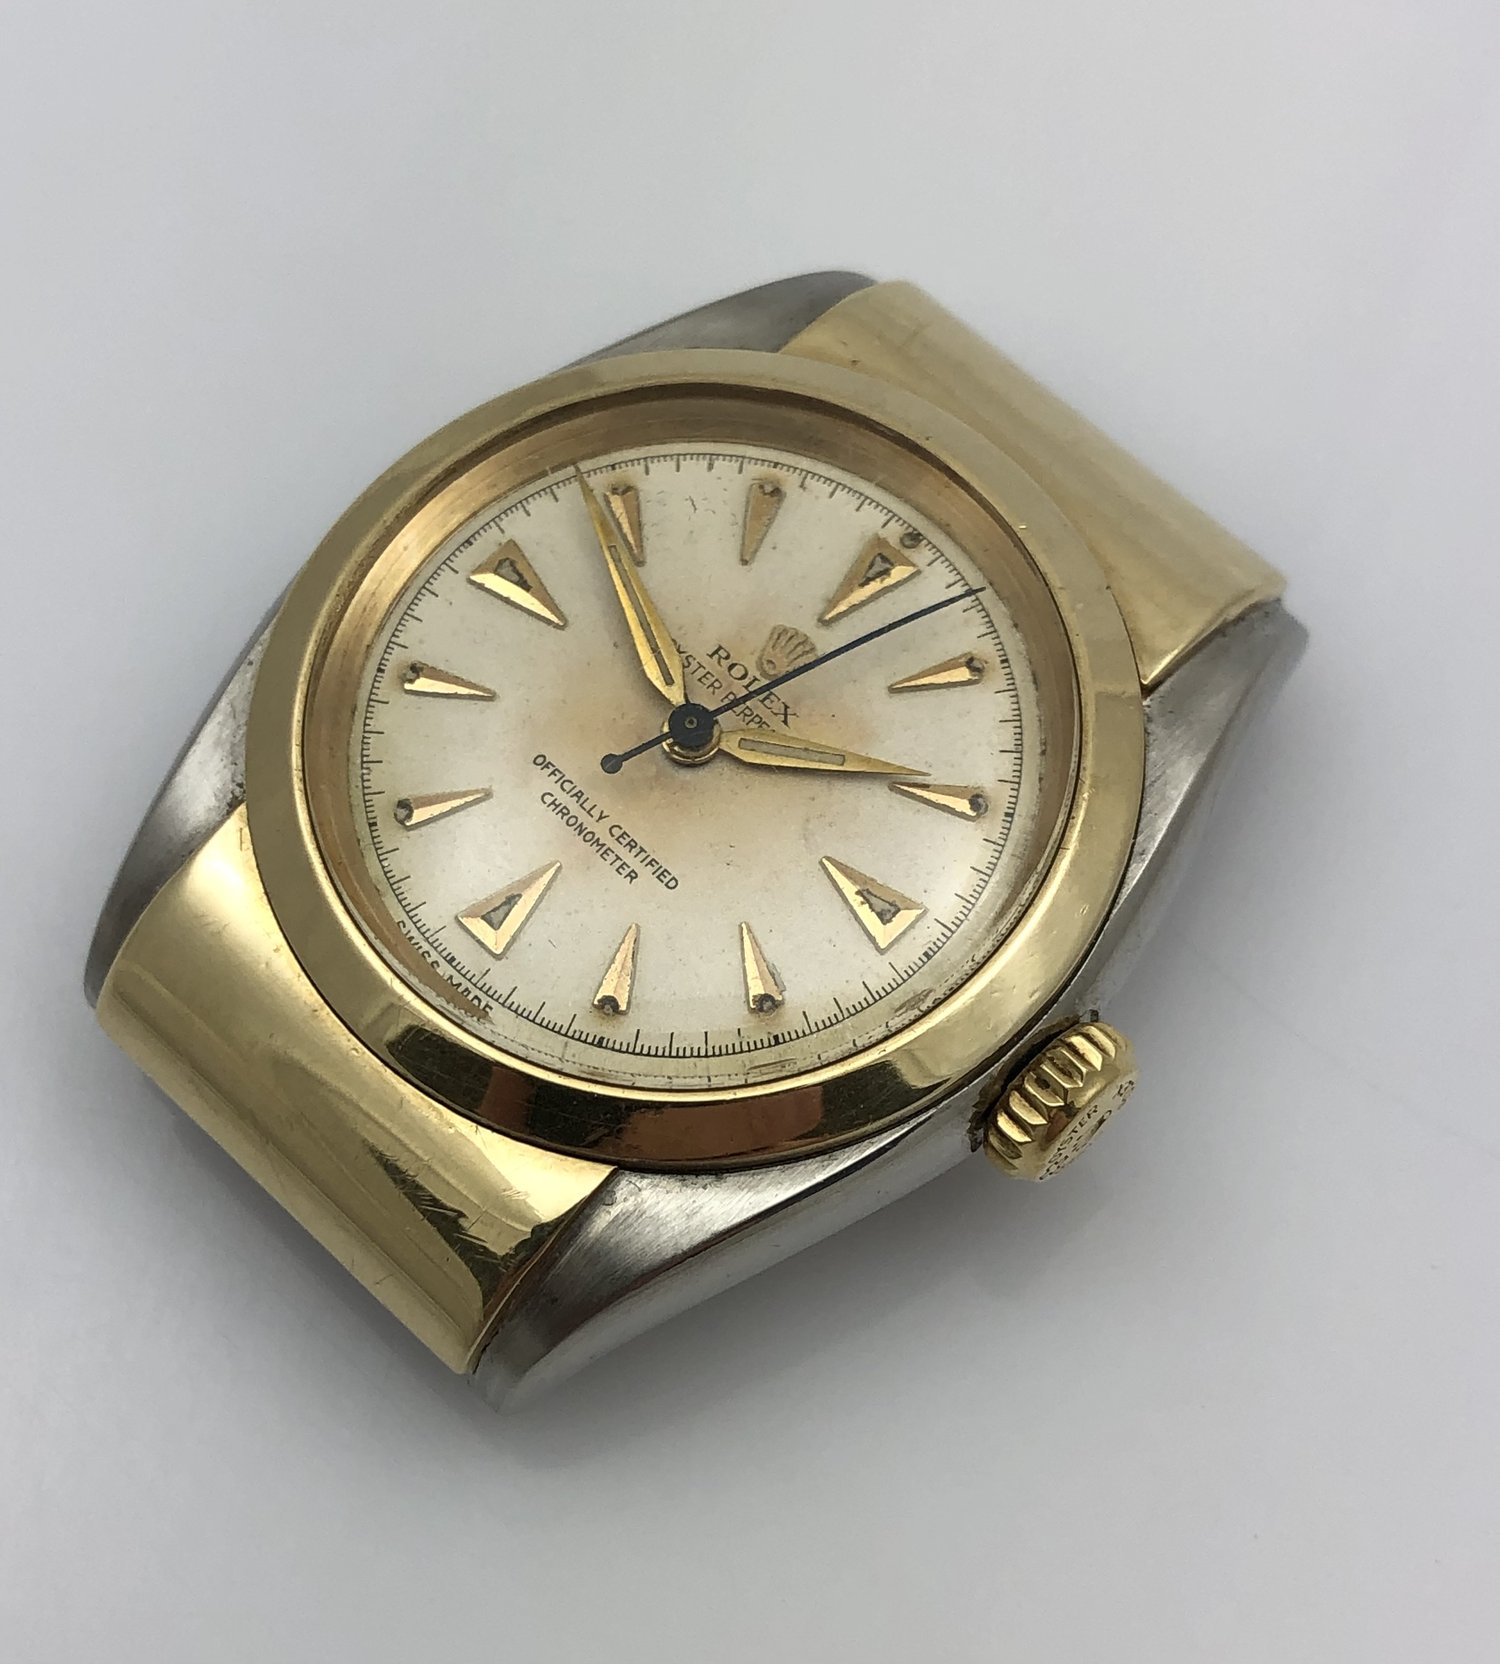 BEING BY AUCTION ON TRADEME. Rolex Oyster Perpetual 1949 Mens HOODED BUBBLEBACK in Steel and Yellow Gold. Reference 6064 totally Original and RARE!!! — About Time